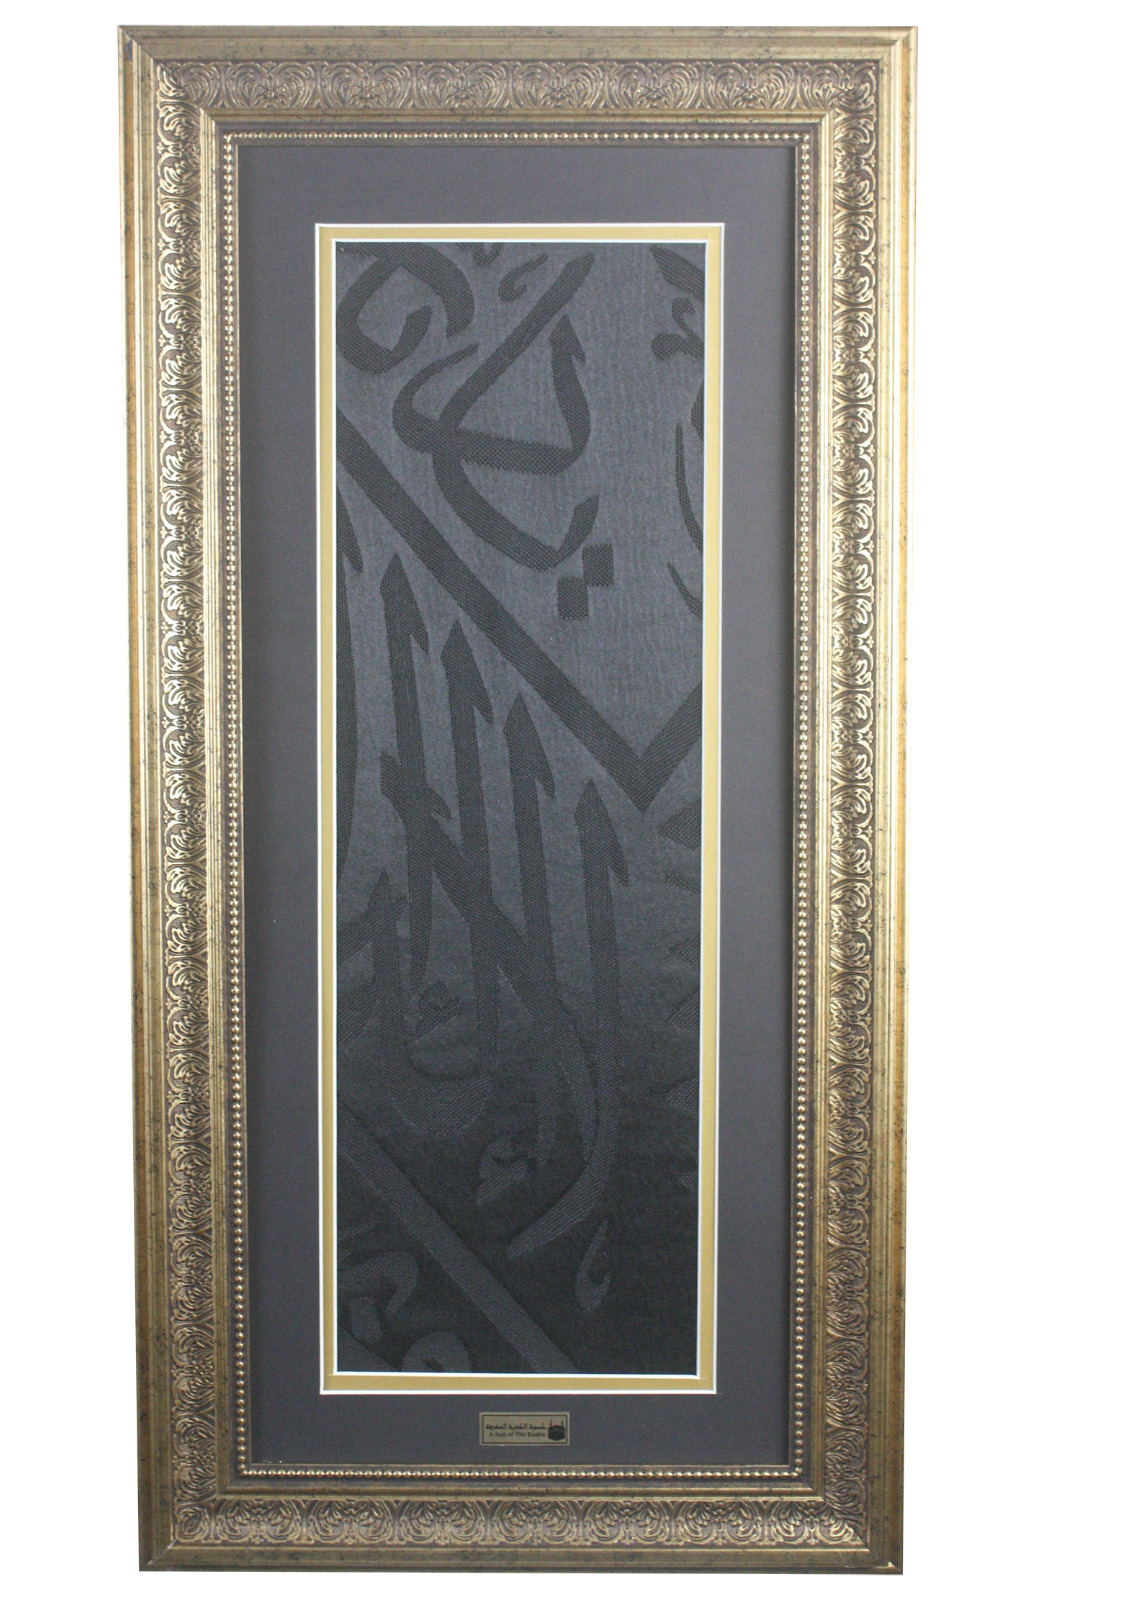 Black Cloth Of The Kaaba FRAMED with Certificate